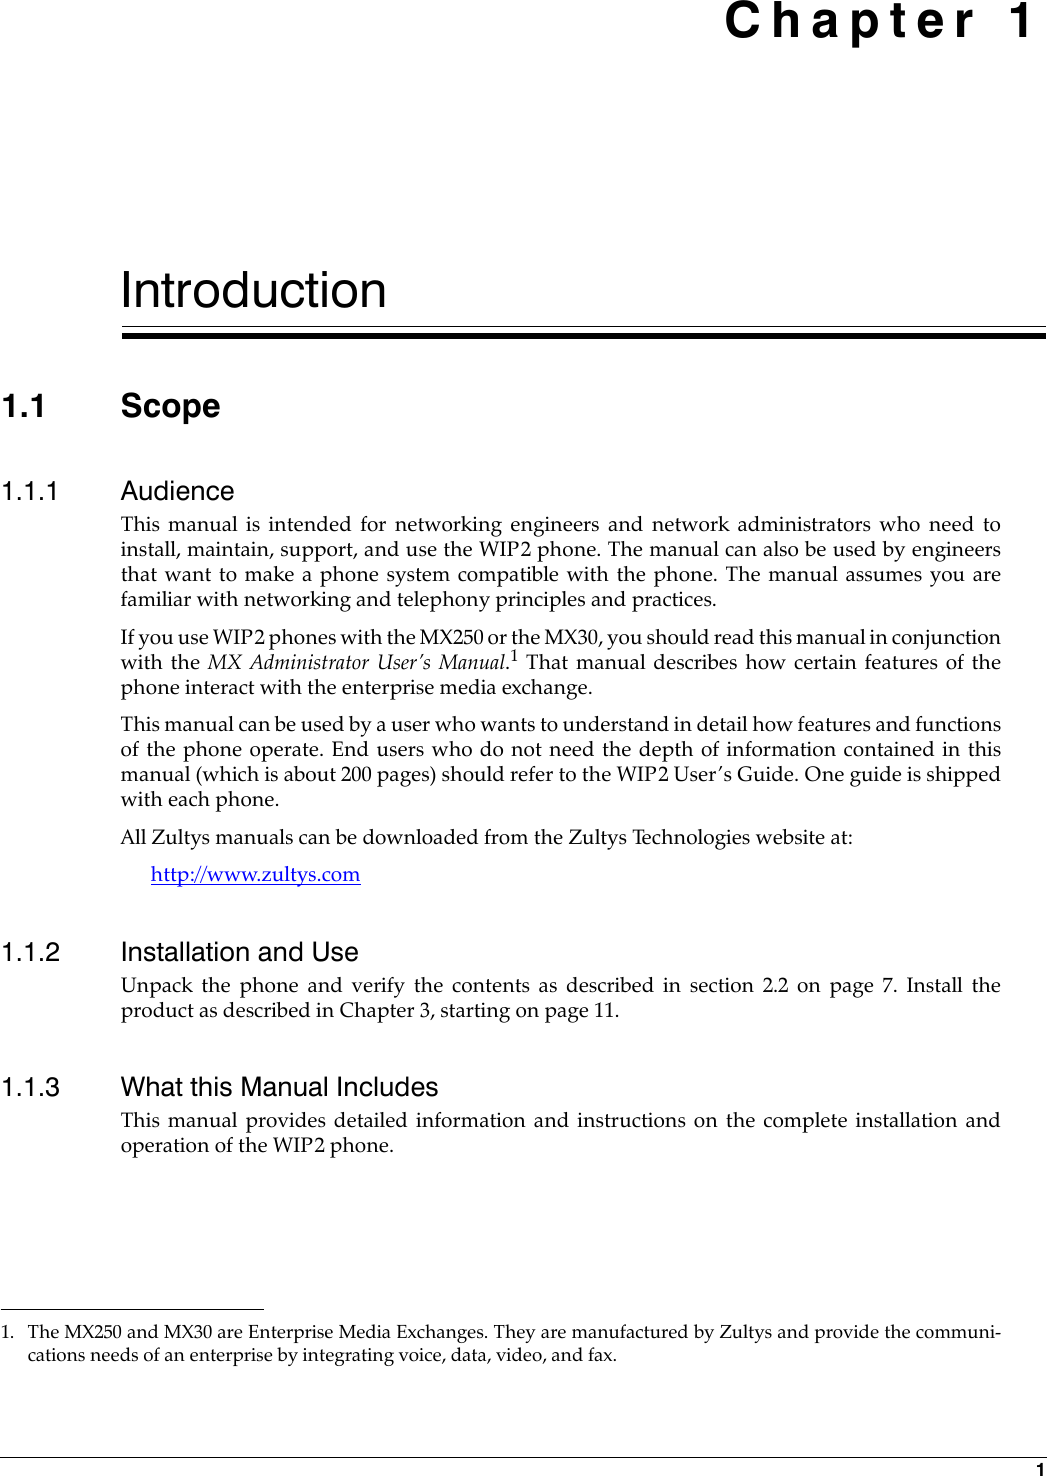 1 Chapter 1Introduction1.1 Scope1.1.1 AudienceThis manual is intended for networking engineers and network administrators who need toinstall, maintain, support, and use the WIP2 phone. The manual can also be used by engineersthat want to make a phone system compatible with the phone. The manual assumes you arefamiliar with networking and telephony principles and practices.If you use WIP2 phones with the MX250 or the MX30, you should read this manual in conjunctionwith the MX Administrator User’s Manual.1 That manual describes how certain features of thephone interact with the enterprise media exchange.This manual can be used by a user who wants to understand in detail how features and functionsof the phone operate. End users who do not need the depth of information contained in thismanual (which is about 200 pages) should refer to the WIP2 User’s Guide. One guide is shippedwith each phone.All Zultys manuals can be downloaded from the Zultys Technologies website at:http://www.zultys.com1.1.2 Installation and UseUnpack the phone and verify the contents as described in section 2.2 on page 7. Install theproduct as described in Chapter 3, starting on page 11.1.1.3 What this Manual IncludesThis manual provides detailed information and instructions on the complete installation andoperation of the WIP2 phone.1. The MX250 and MX30 are Enterprise Media Exchanges. They are manufactured by Zultys and provide the communi-cations needs of an enterprise by integrating voice, data, video, and fax.